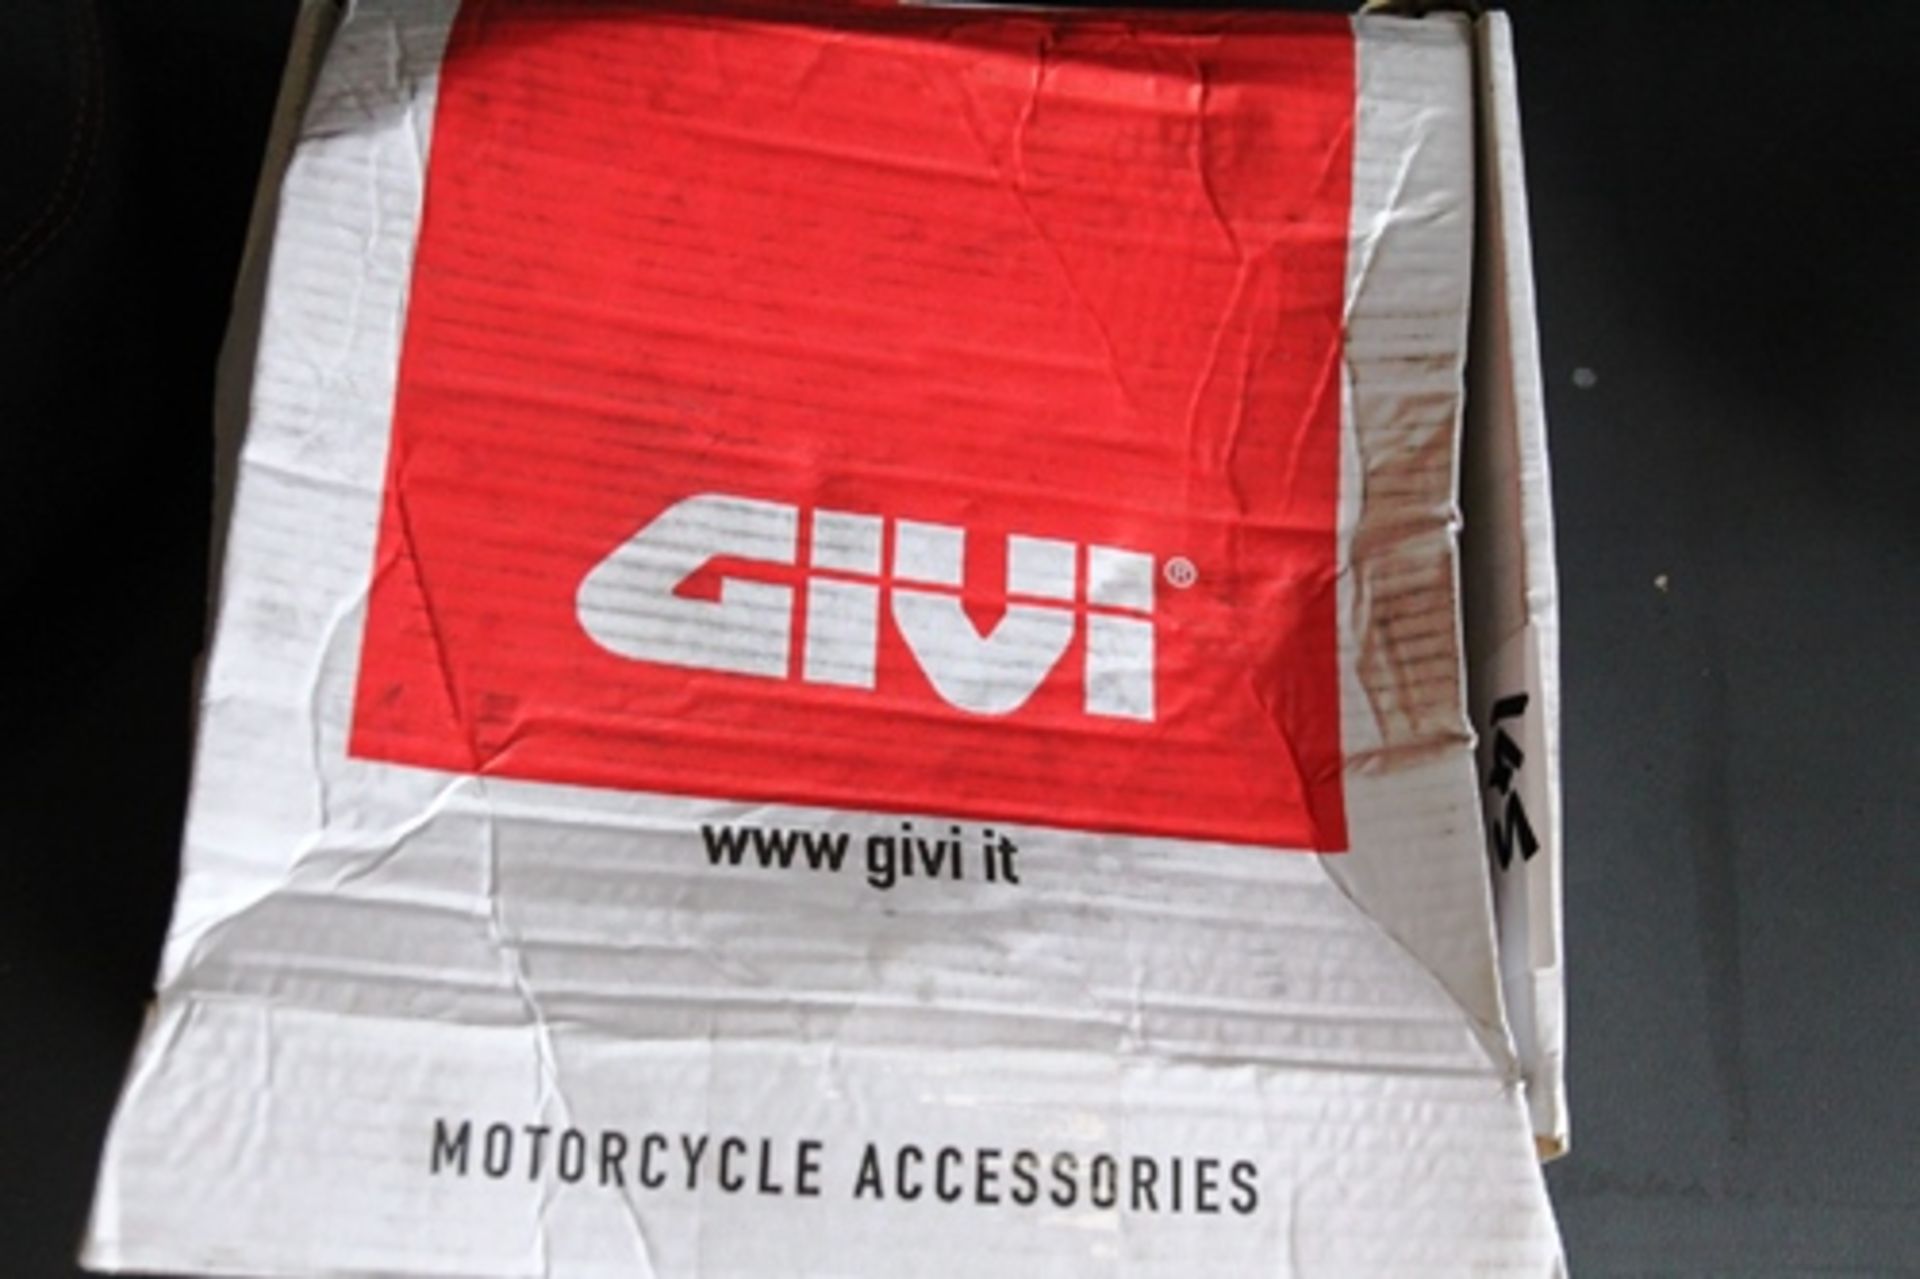 1 x Givi motorcycle backrest, 1 x Puig clock ferring and a Ducati Performance P.N. 767971108 - Mixed - Image 5 of 5